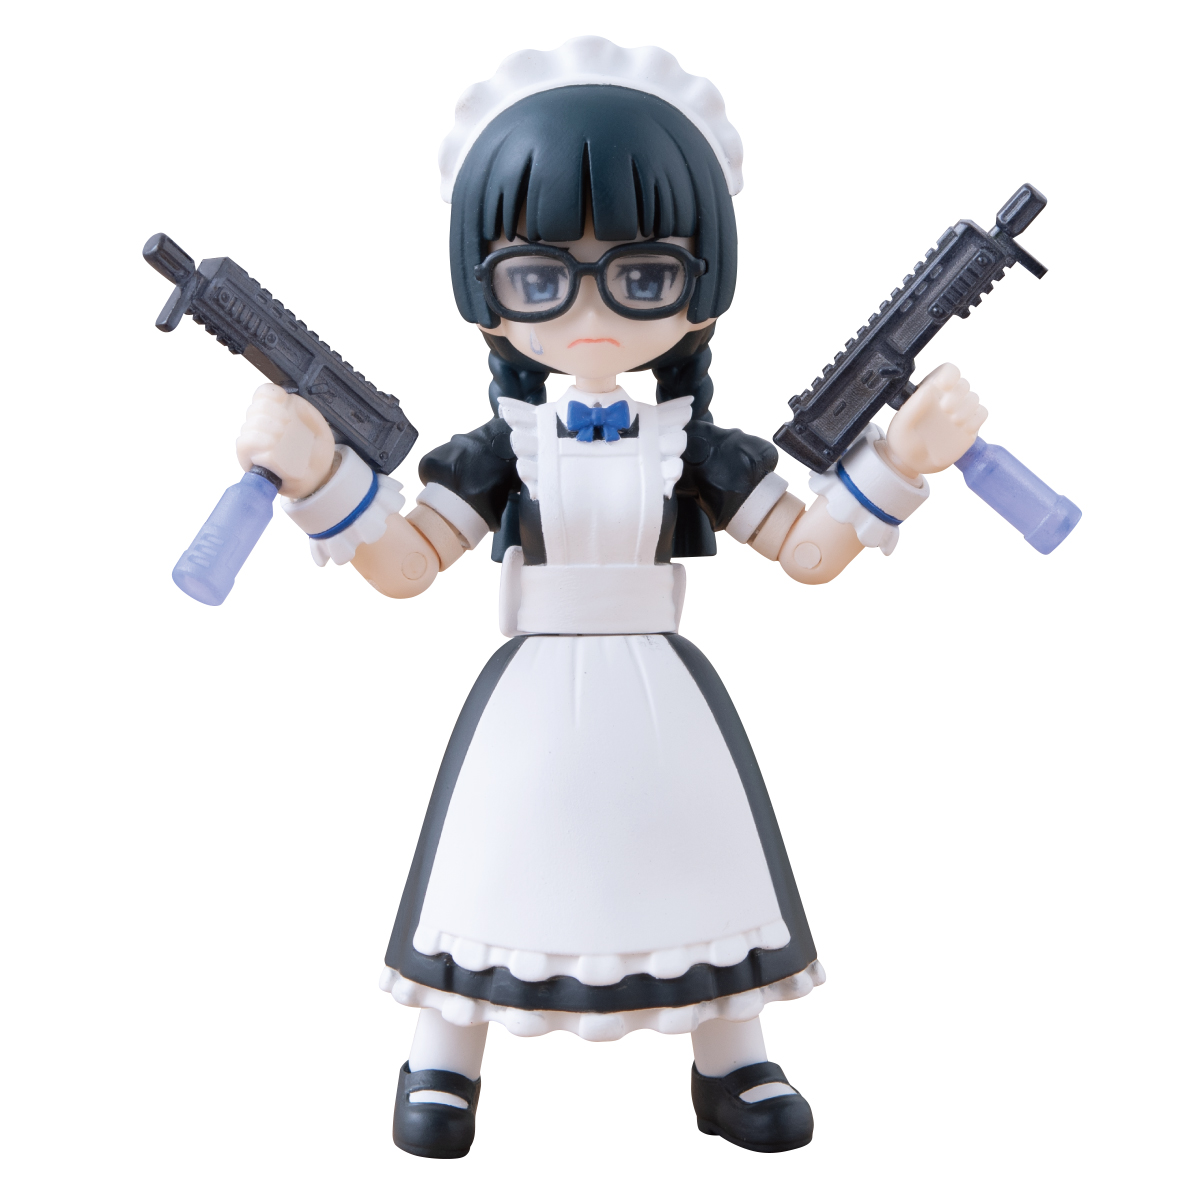 Aqua Shooters 06 Dx Maid Chief Premium Bandai Hong Kong Online Store For Action Figures Model Kits Toys And More